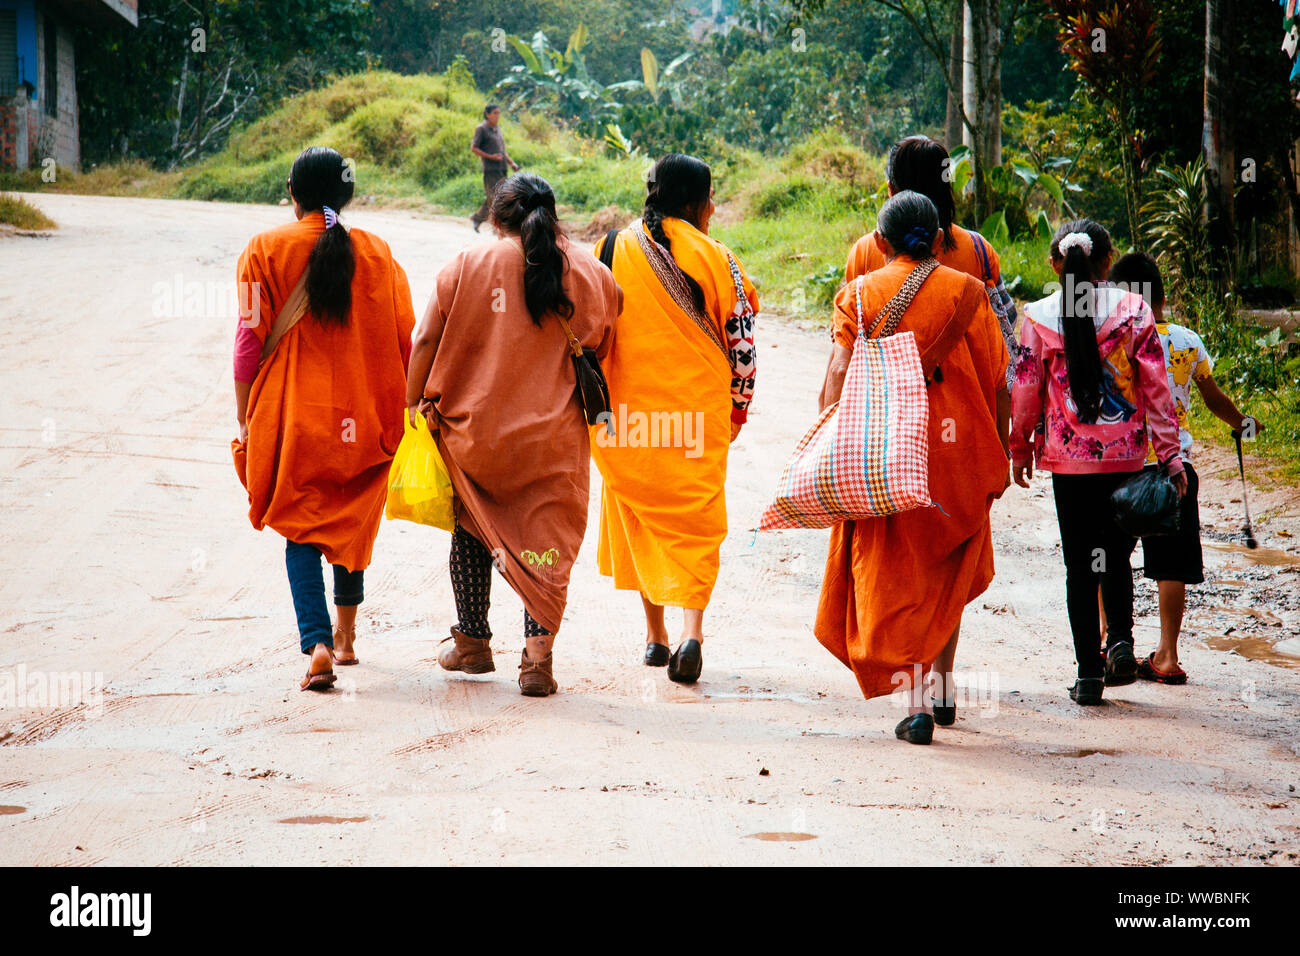 A group of indigenous women are going to the next big village to sell their neat. Stock Photo